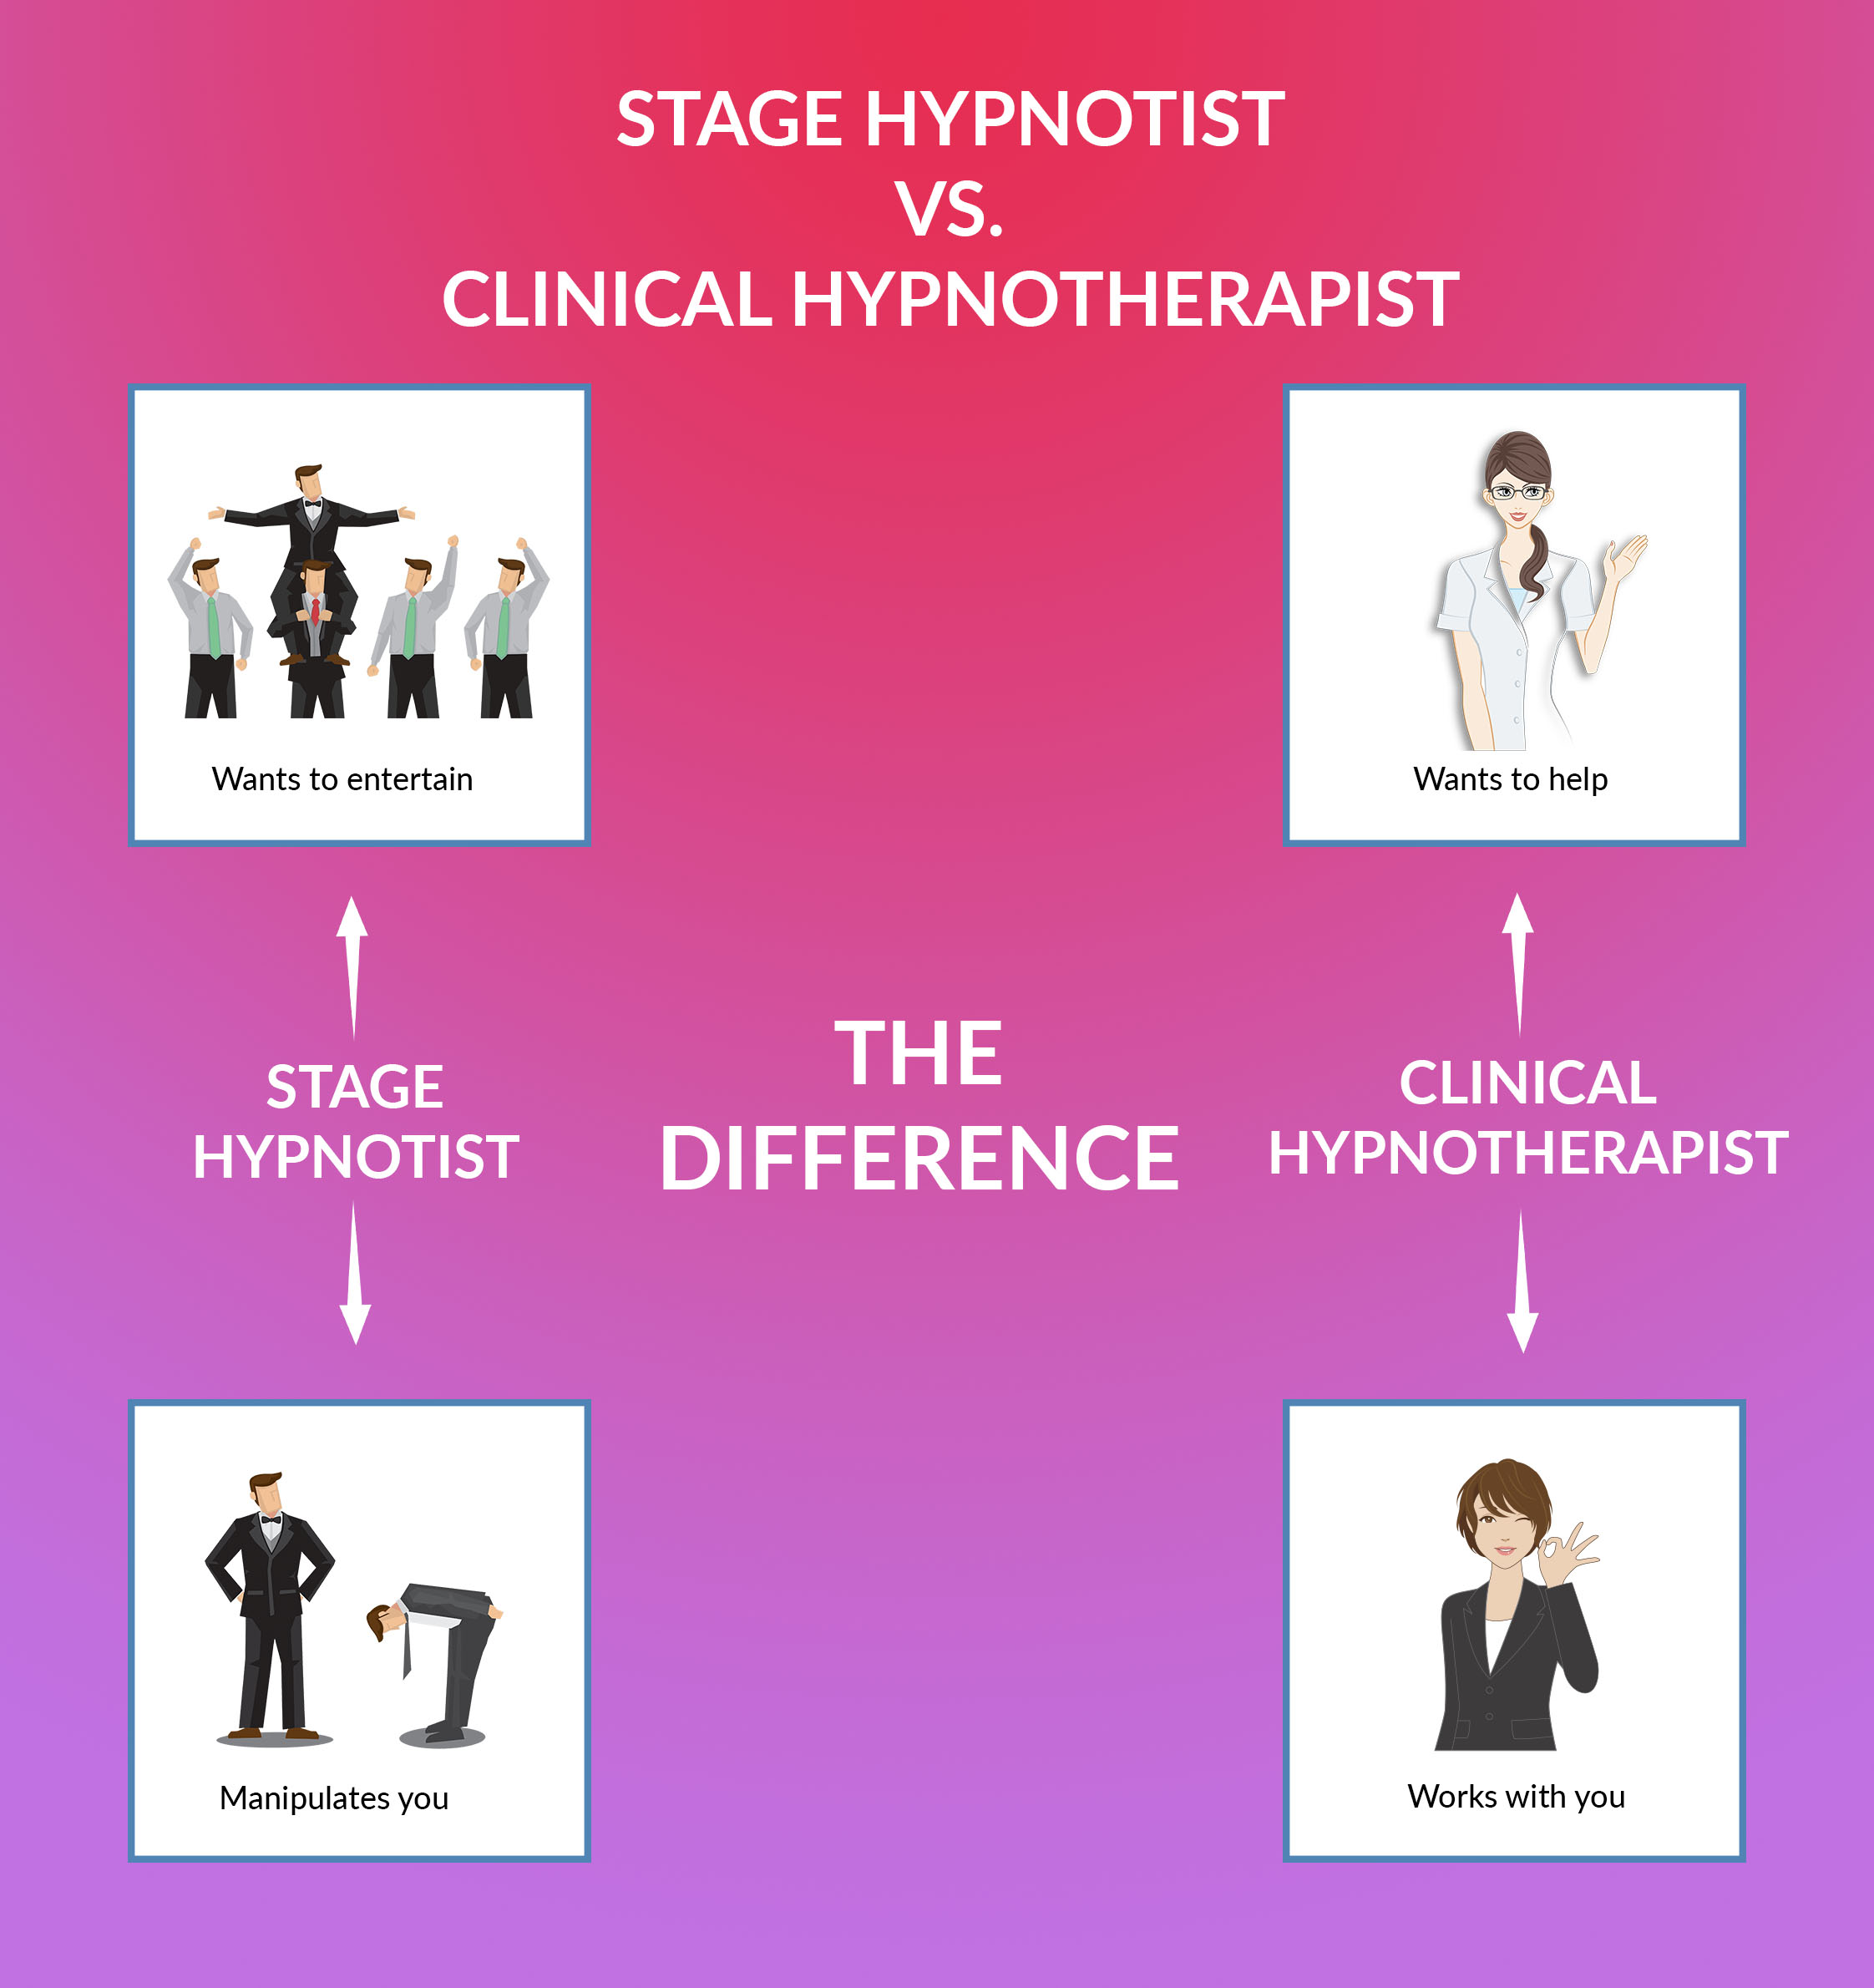 Why a stage hypnotist is nothing like a clinical hypnotherapist